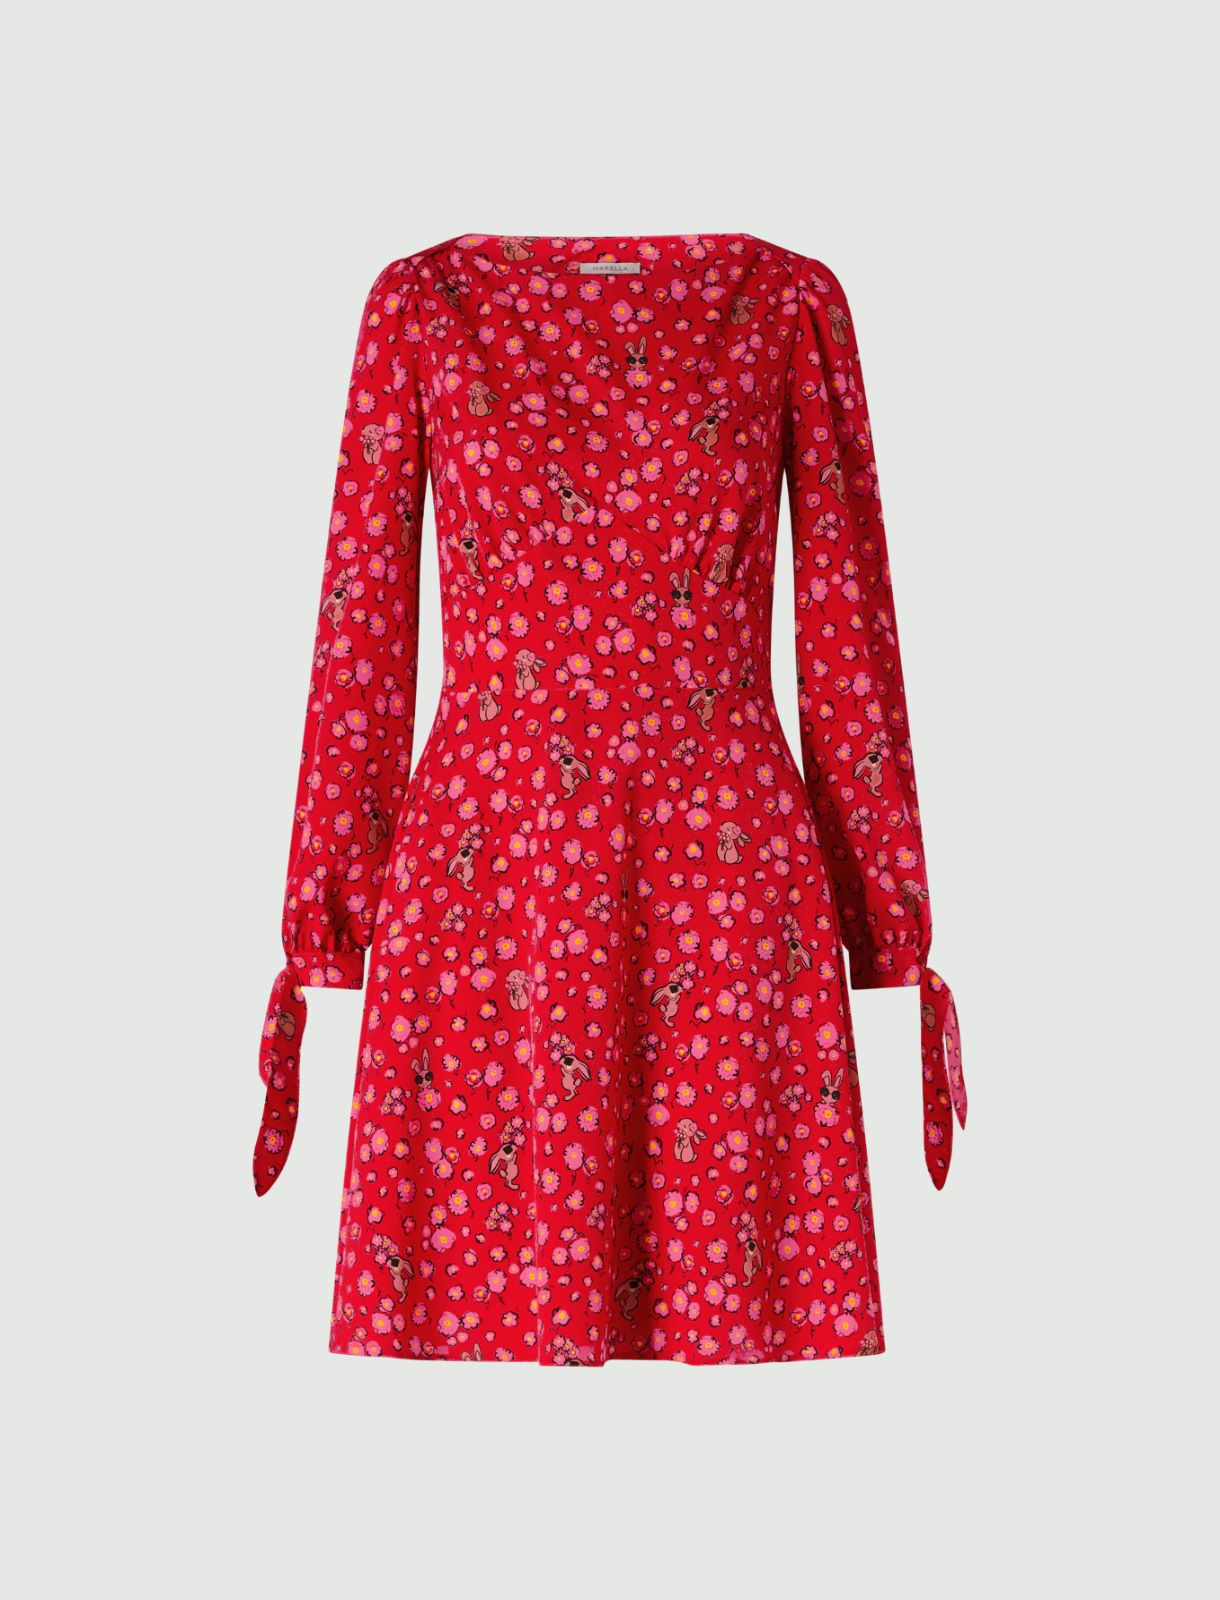 Patterned dress - Red - Marella - 5